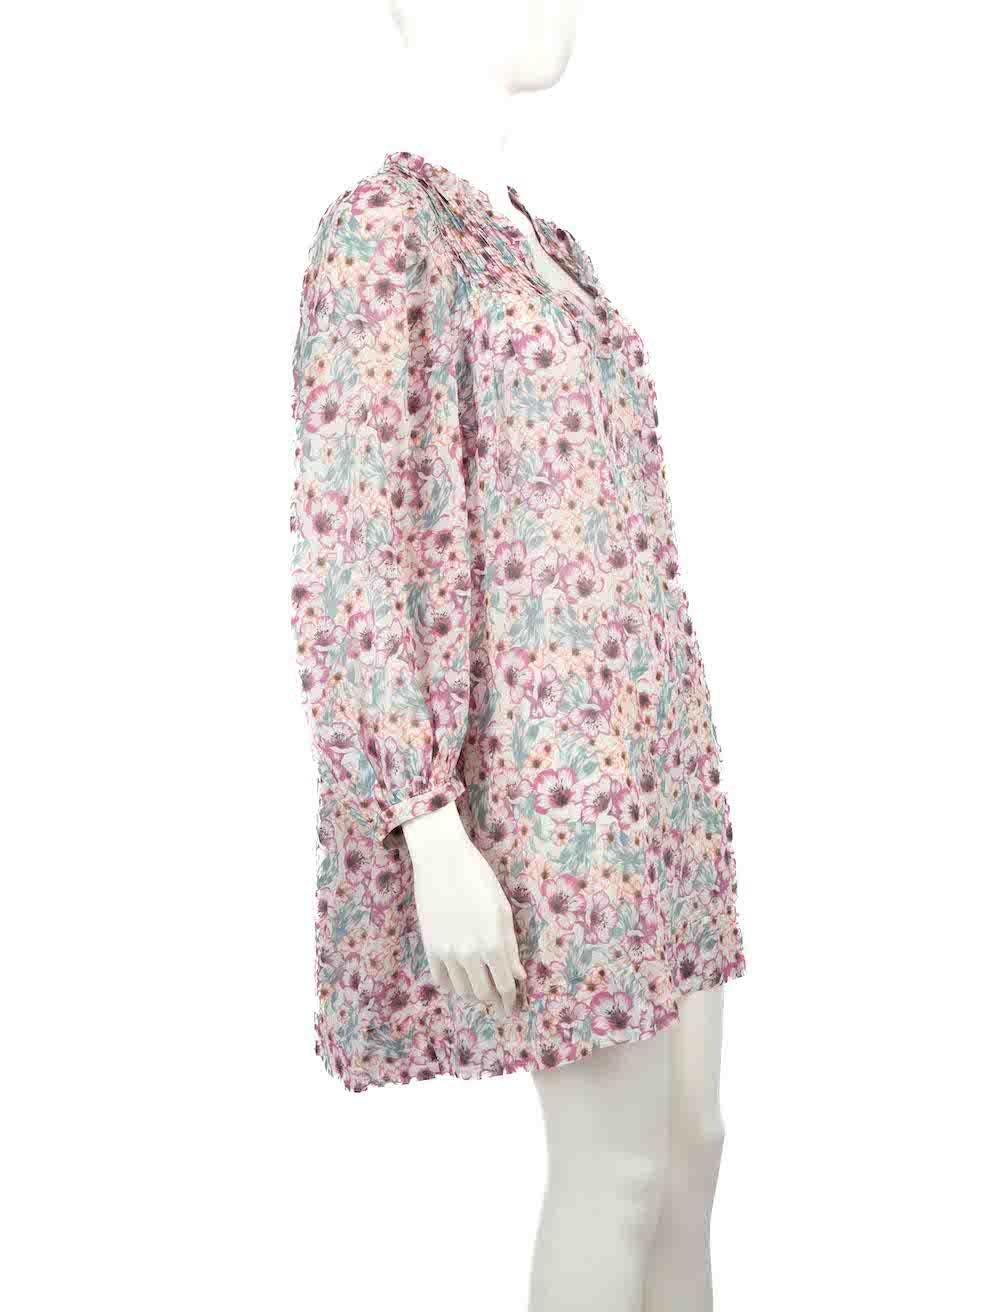 CONDITION is Very good. Hardly any visible wear to dress is evident on this used Isabel Marant √àtoile designer resale item.
 
 
 
 Details
 
 
 Multicolour- purple, blue
 
 Cotton
 
 Dress
 
 Floral print
 
 Knee length
 
 Sheer
 
 Long sleeves
 
